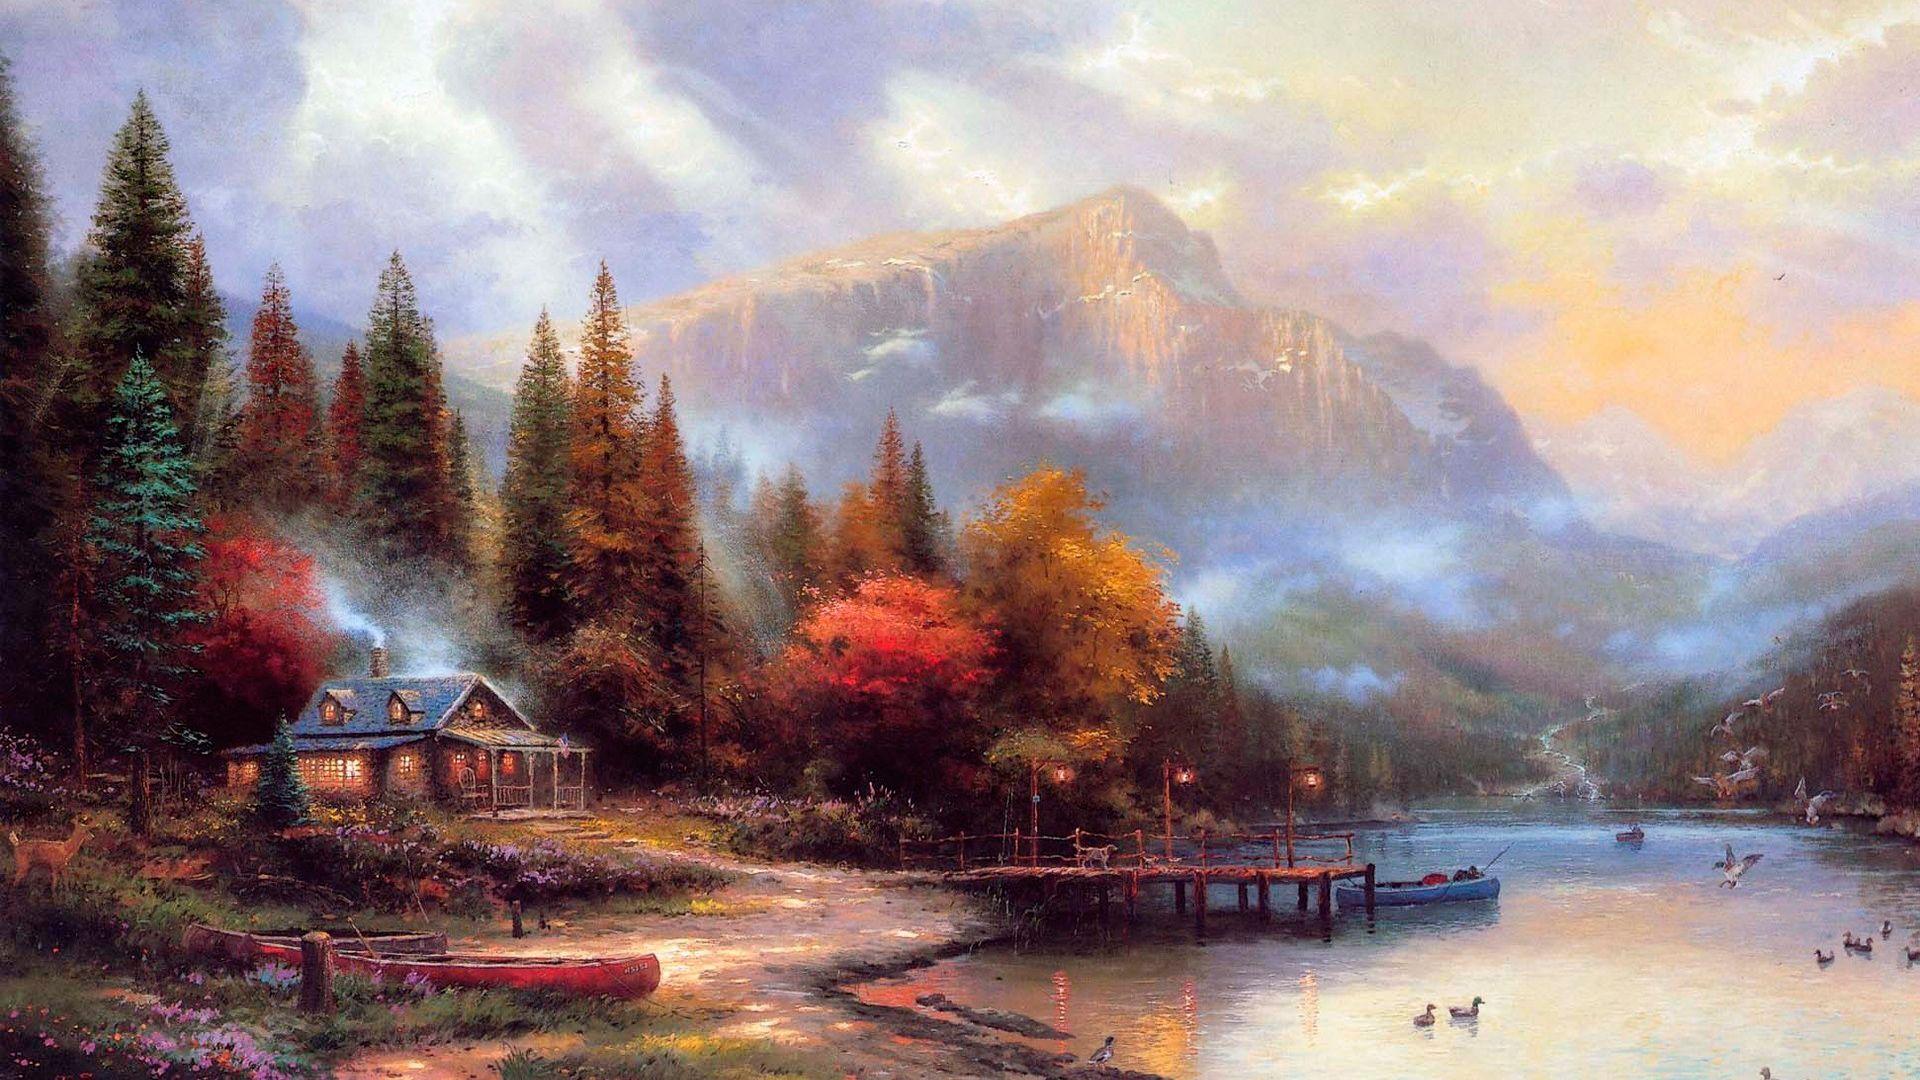 best image about The Painter Of Light Thomas Kinkade on. HD